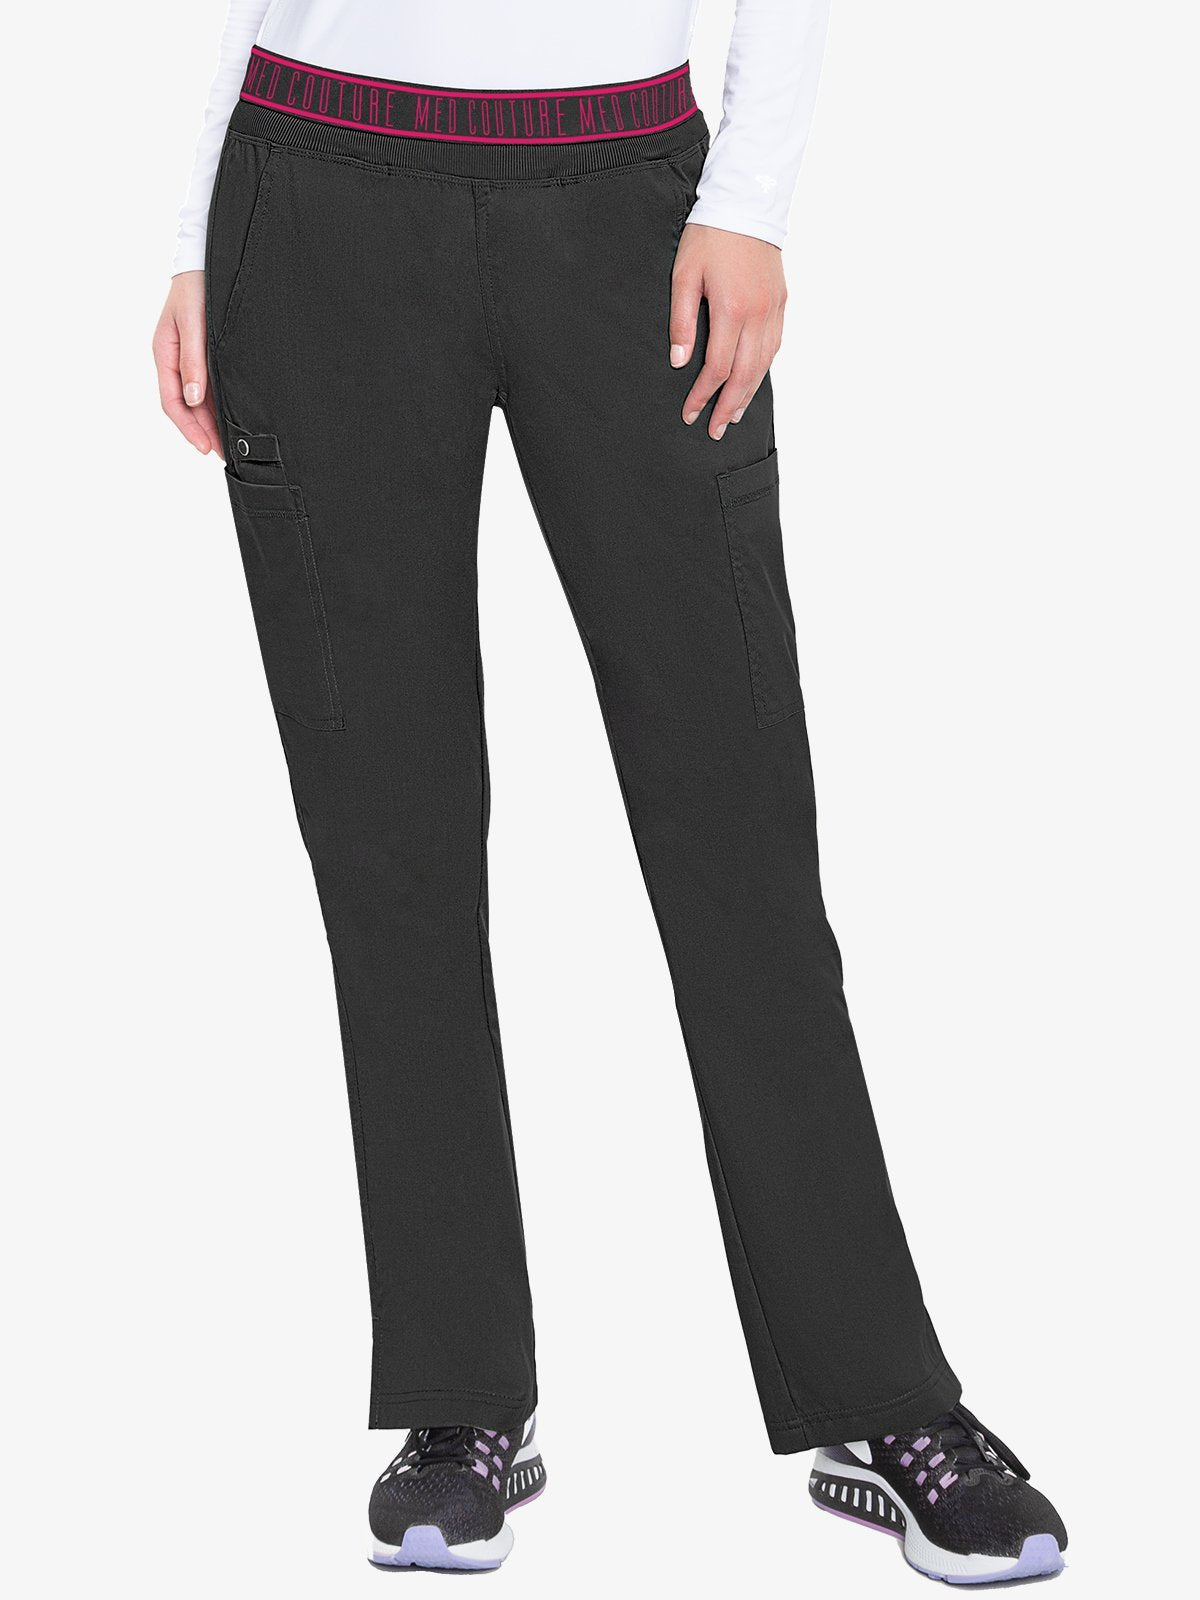 Med Couture Touch Women's Yoga Cargo Pant #7739